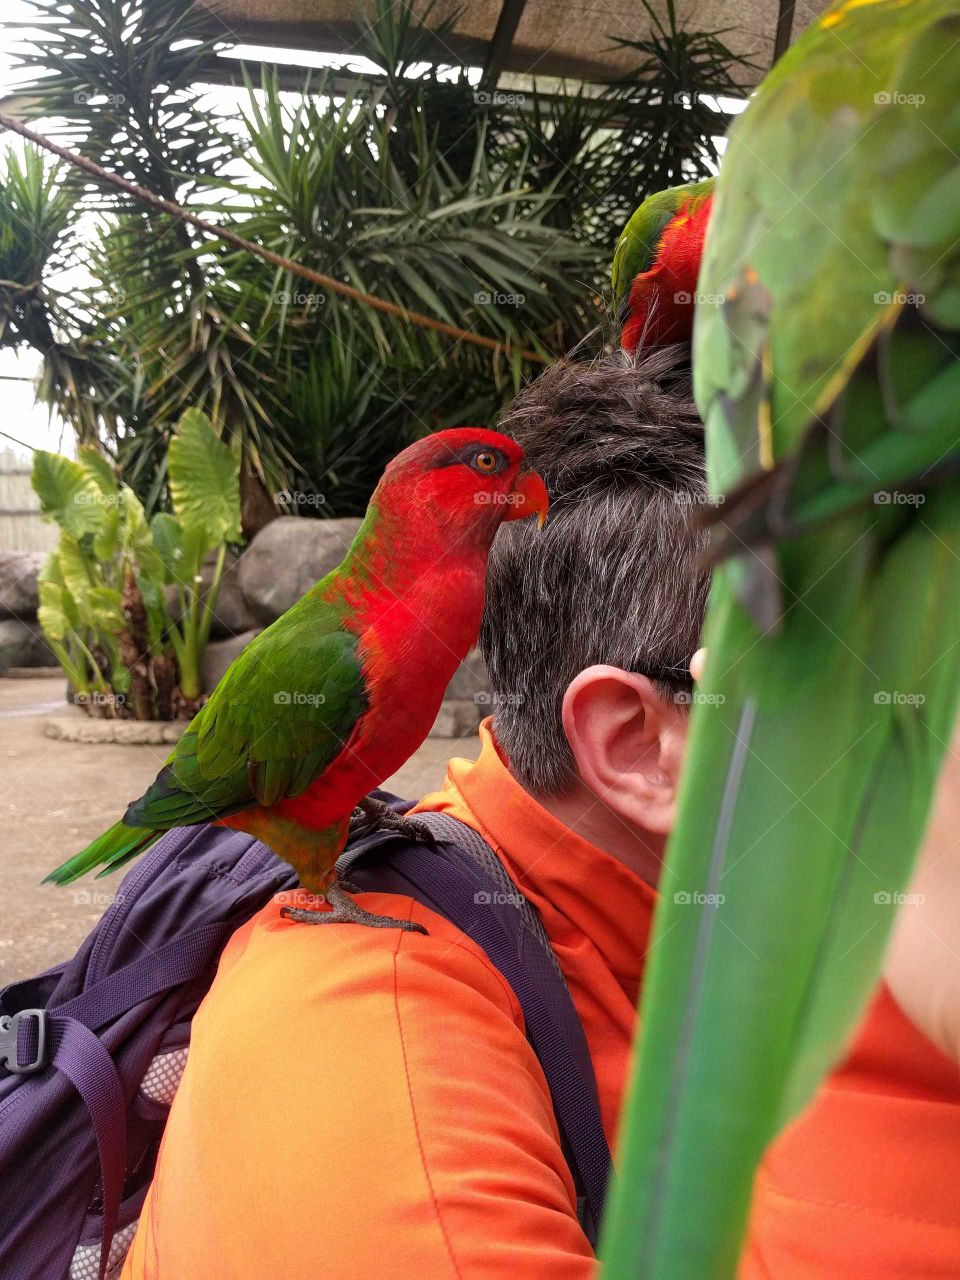 Man with two parrots on his head in South Africa